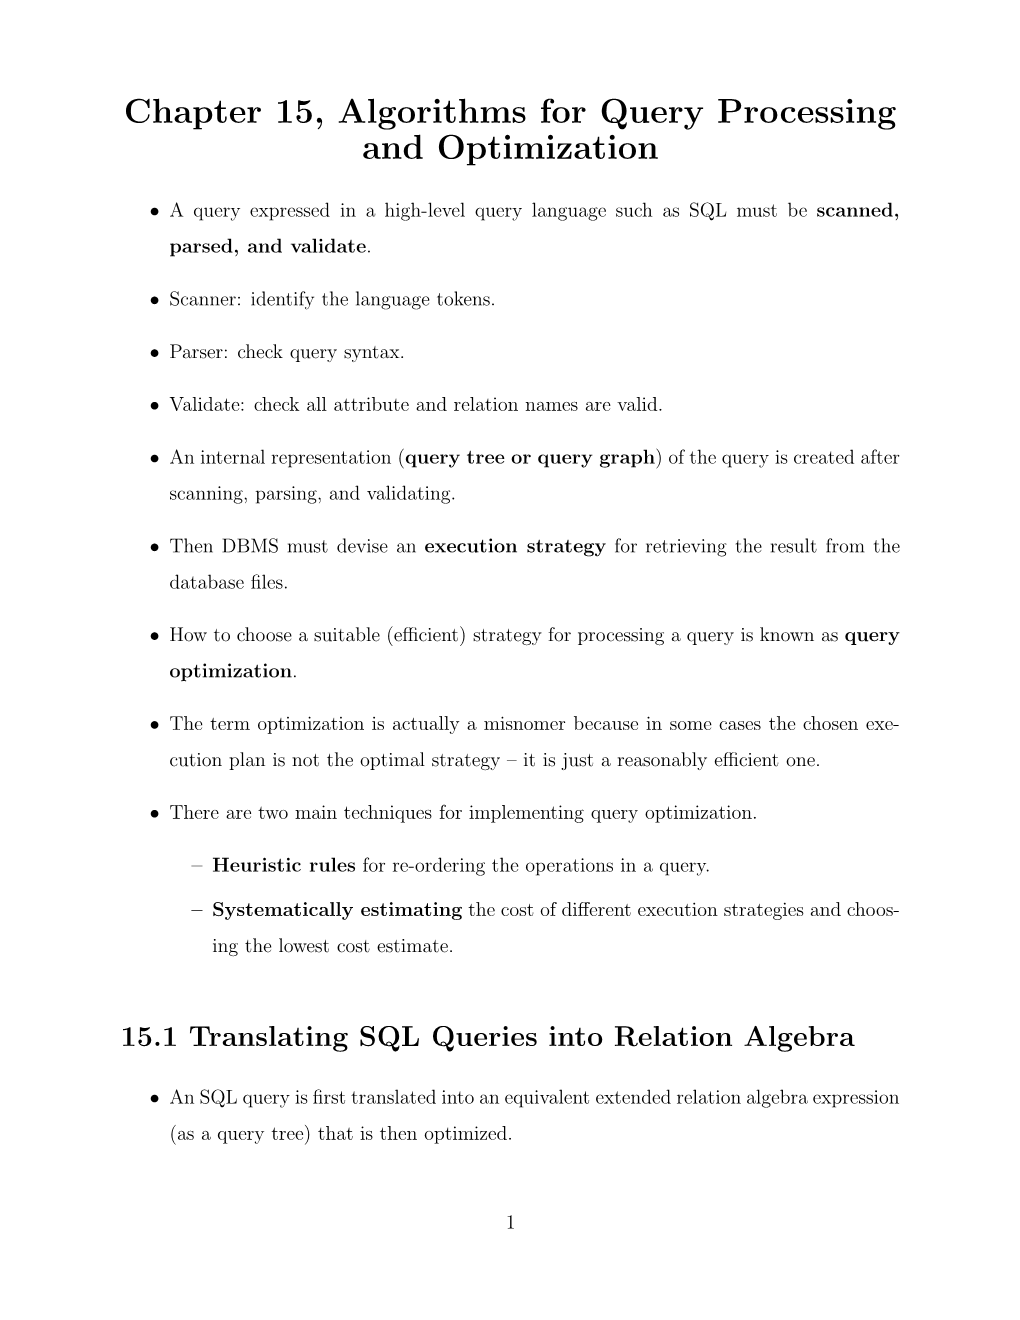 Chapter 15, Algorithms for Query Processing and Optimization